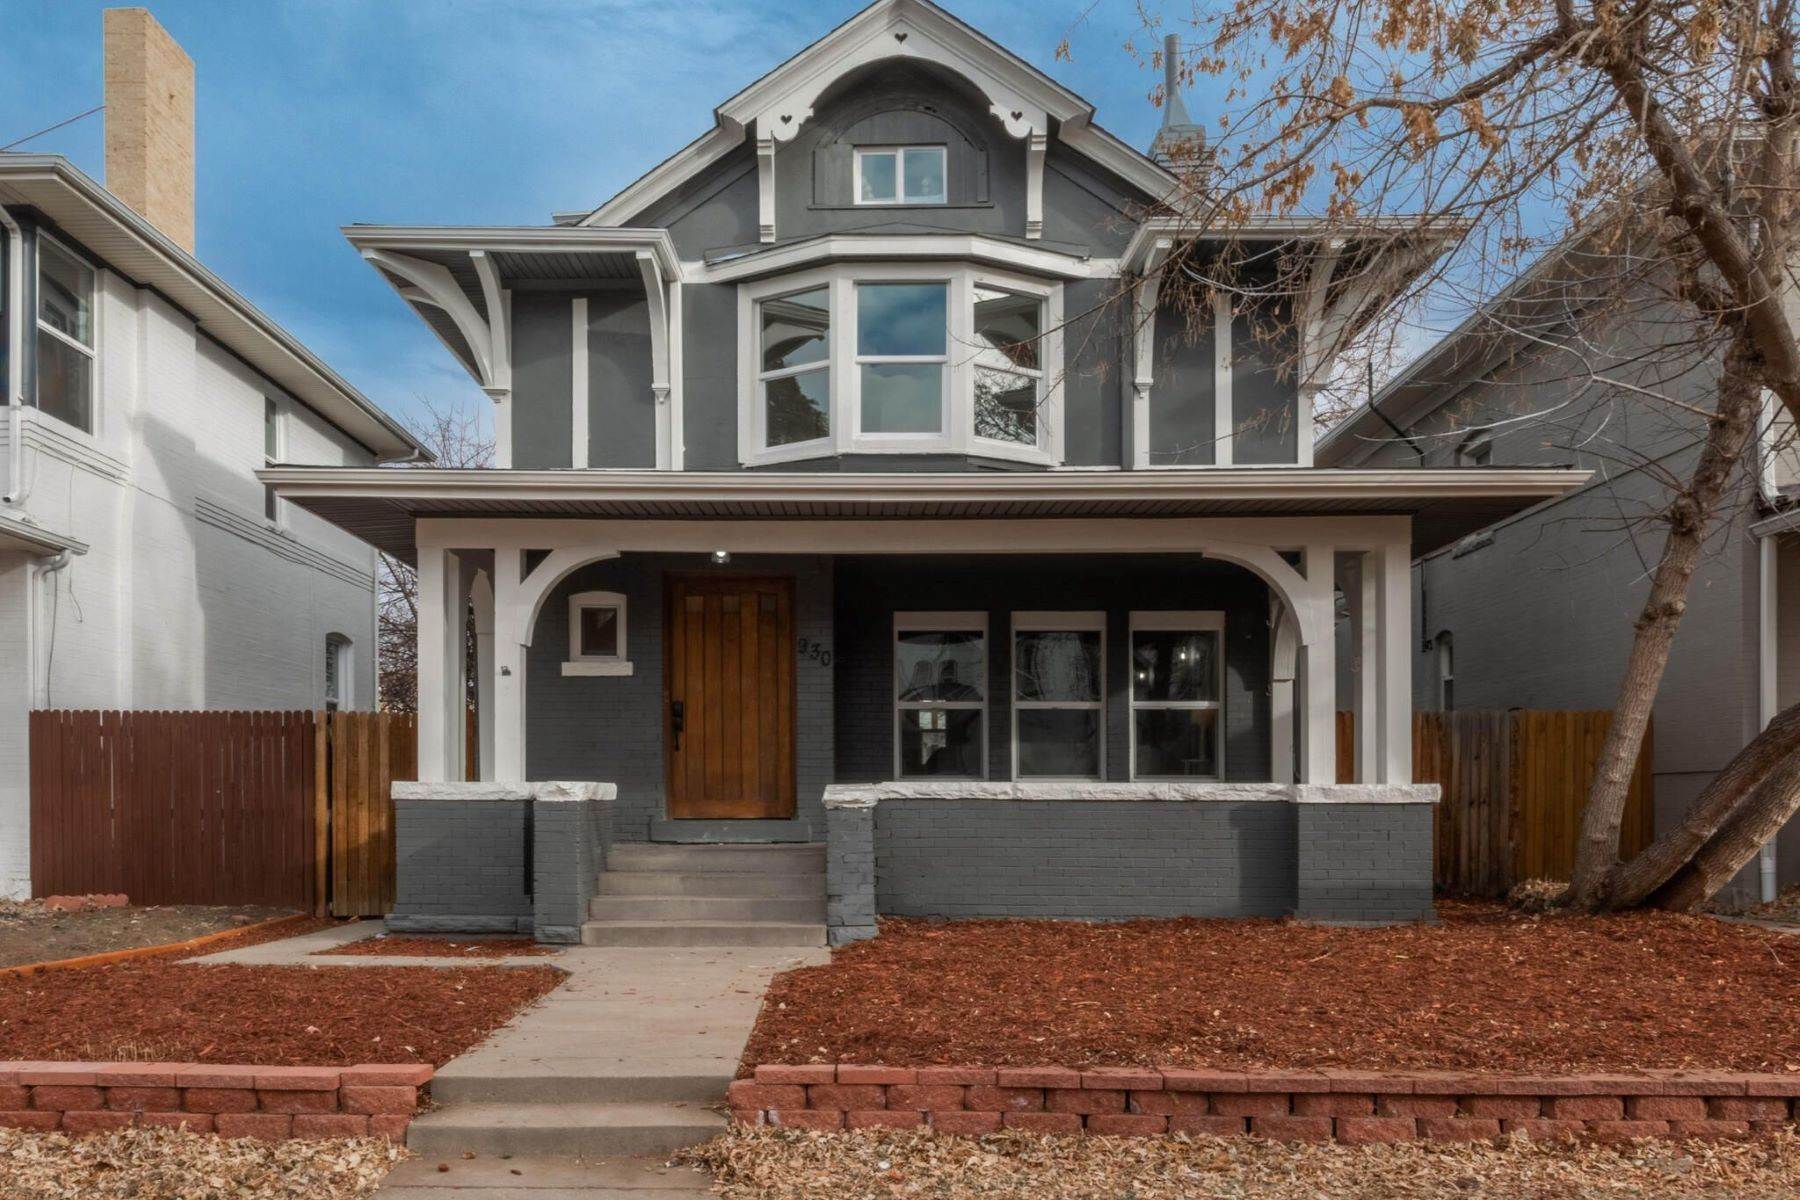 Single Family Homes for Active at 930 N Ogden Street, Denver, CO, 80218 930 N Ogden Street Denver, Colorado 80218 United States